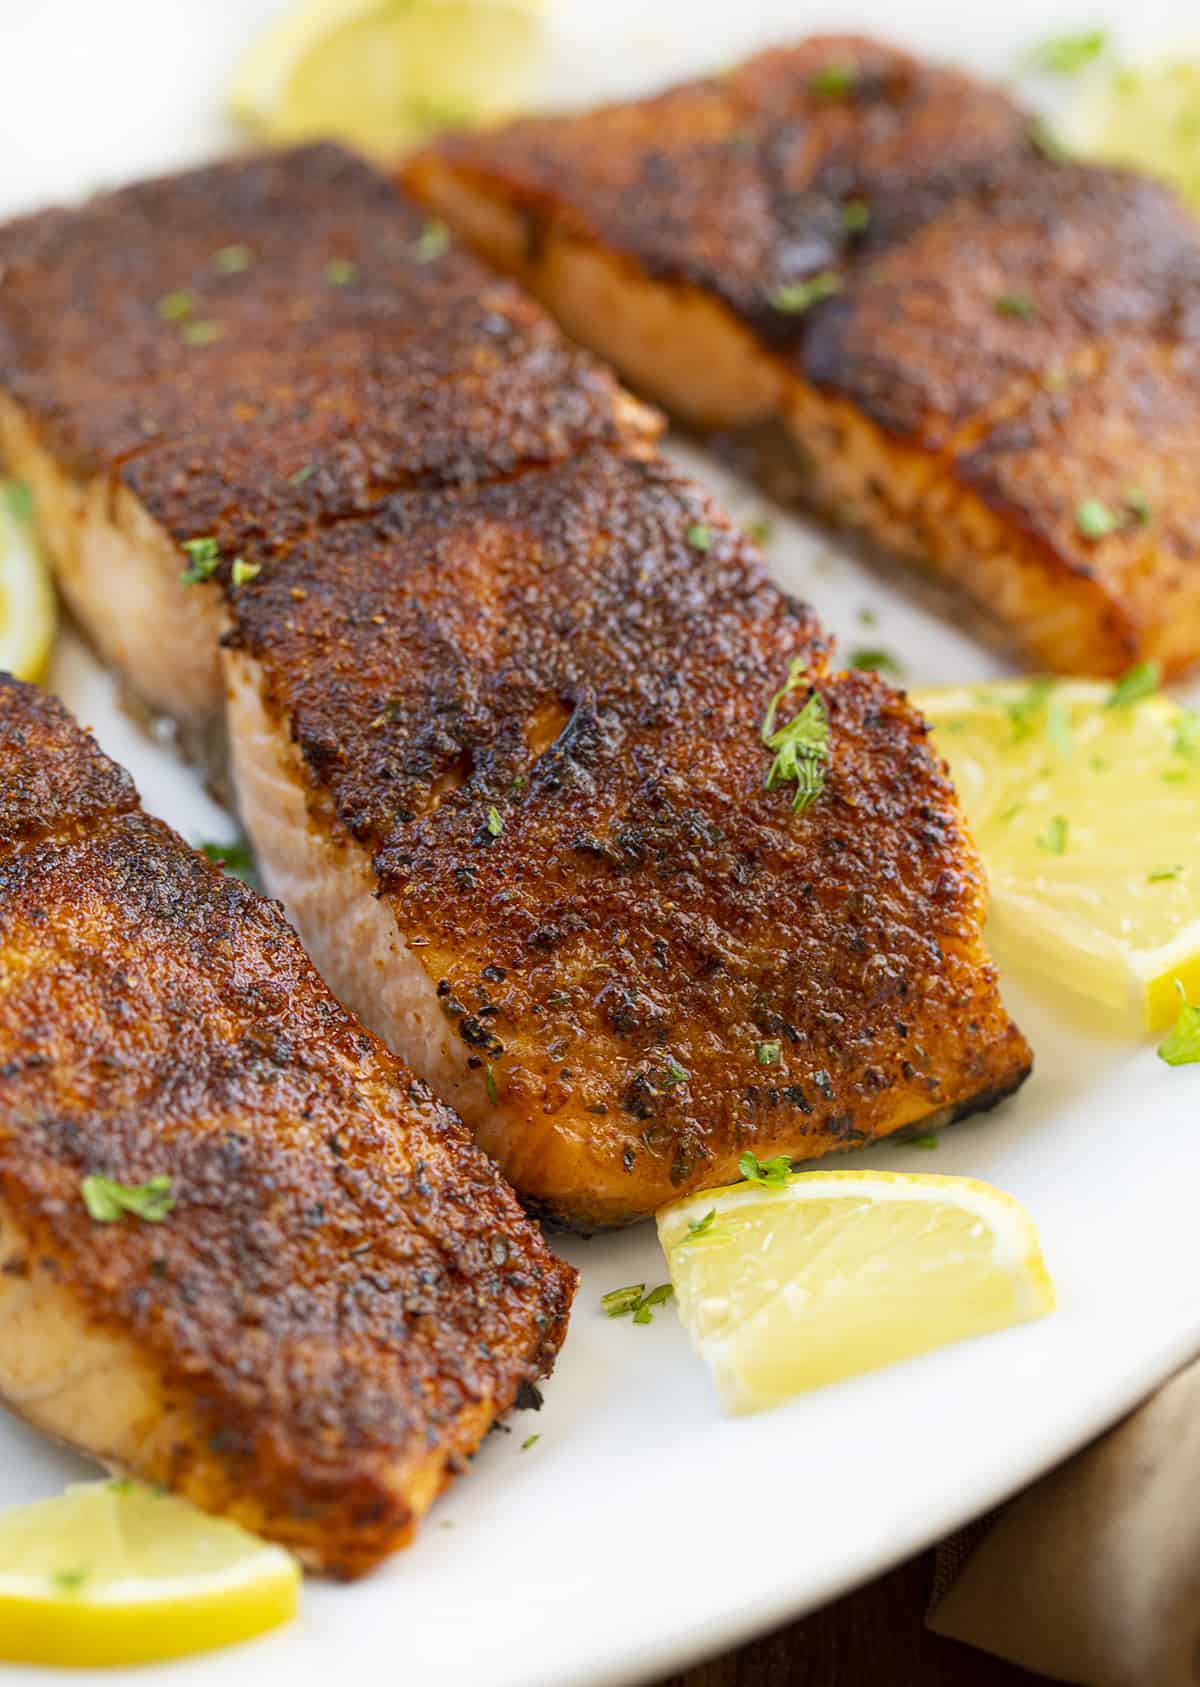 Close up a a Piece of Blackened Salmon on a Plate. Dinner, Supper, Salmon Recipes, Blackened Salmon, Air Fryer Recipes, How to Make Salmon in the Air Fryer, Baked Salmon, Baked Blackened Salmon, i am homesteader, iamhomesteader